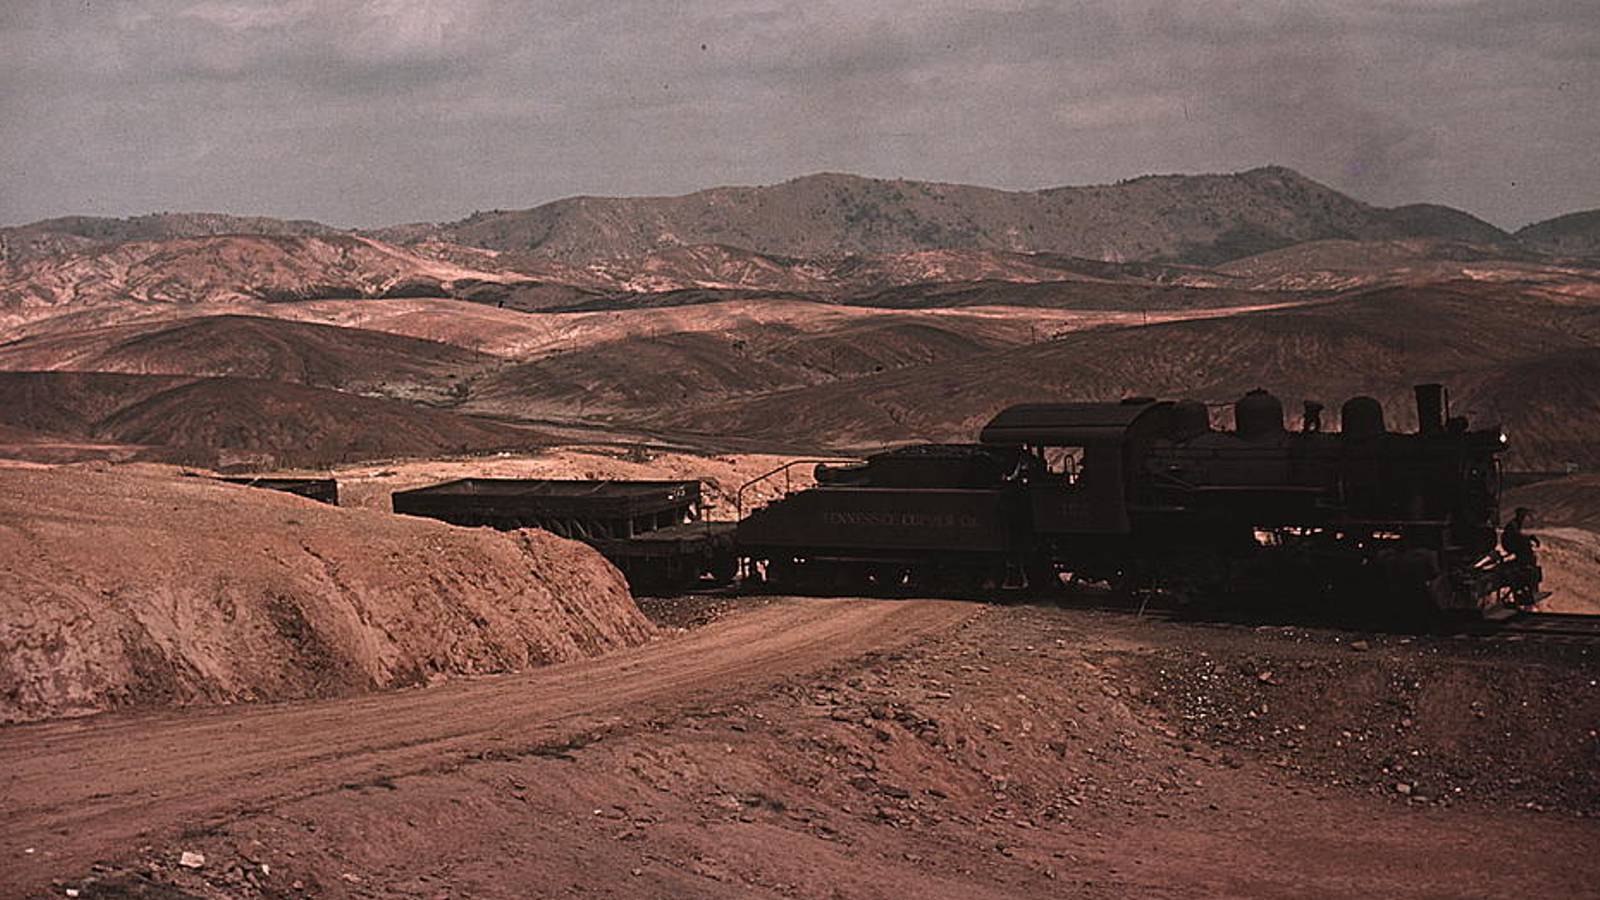 A train bringing copper ore out of the mines.